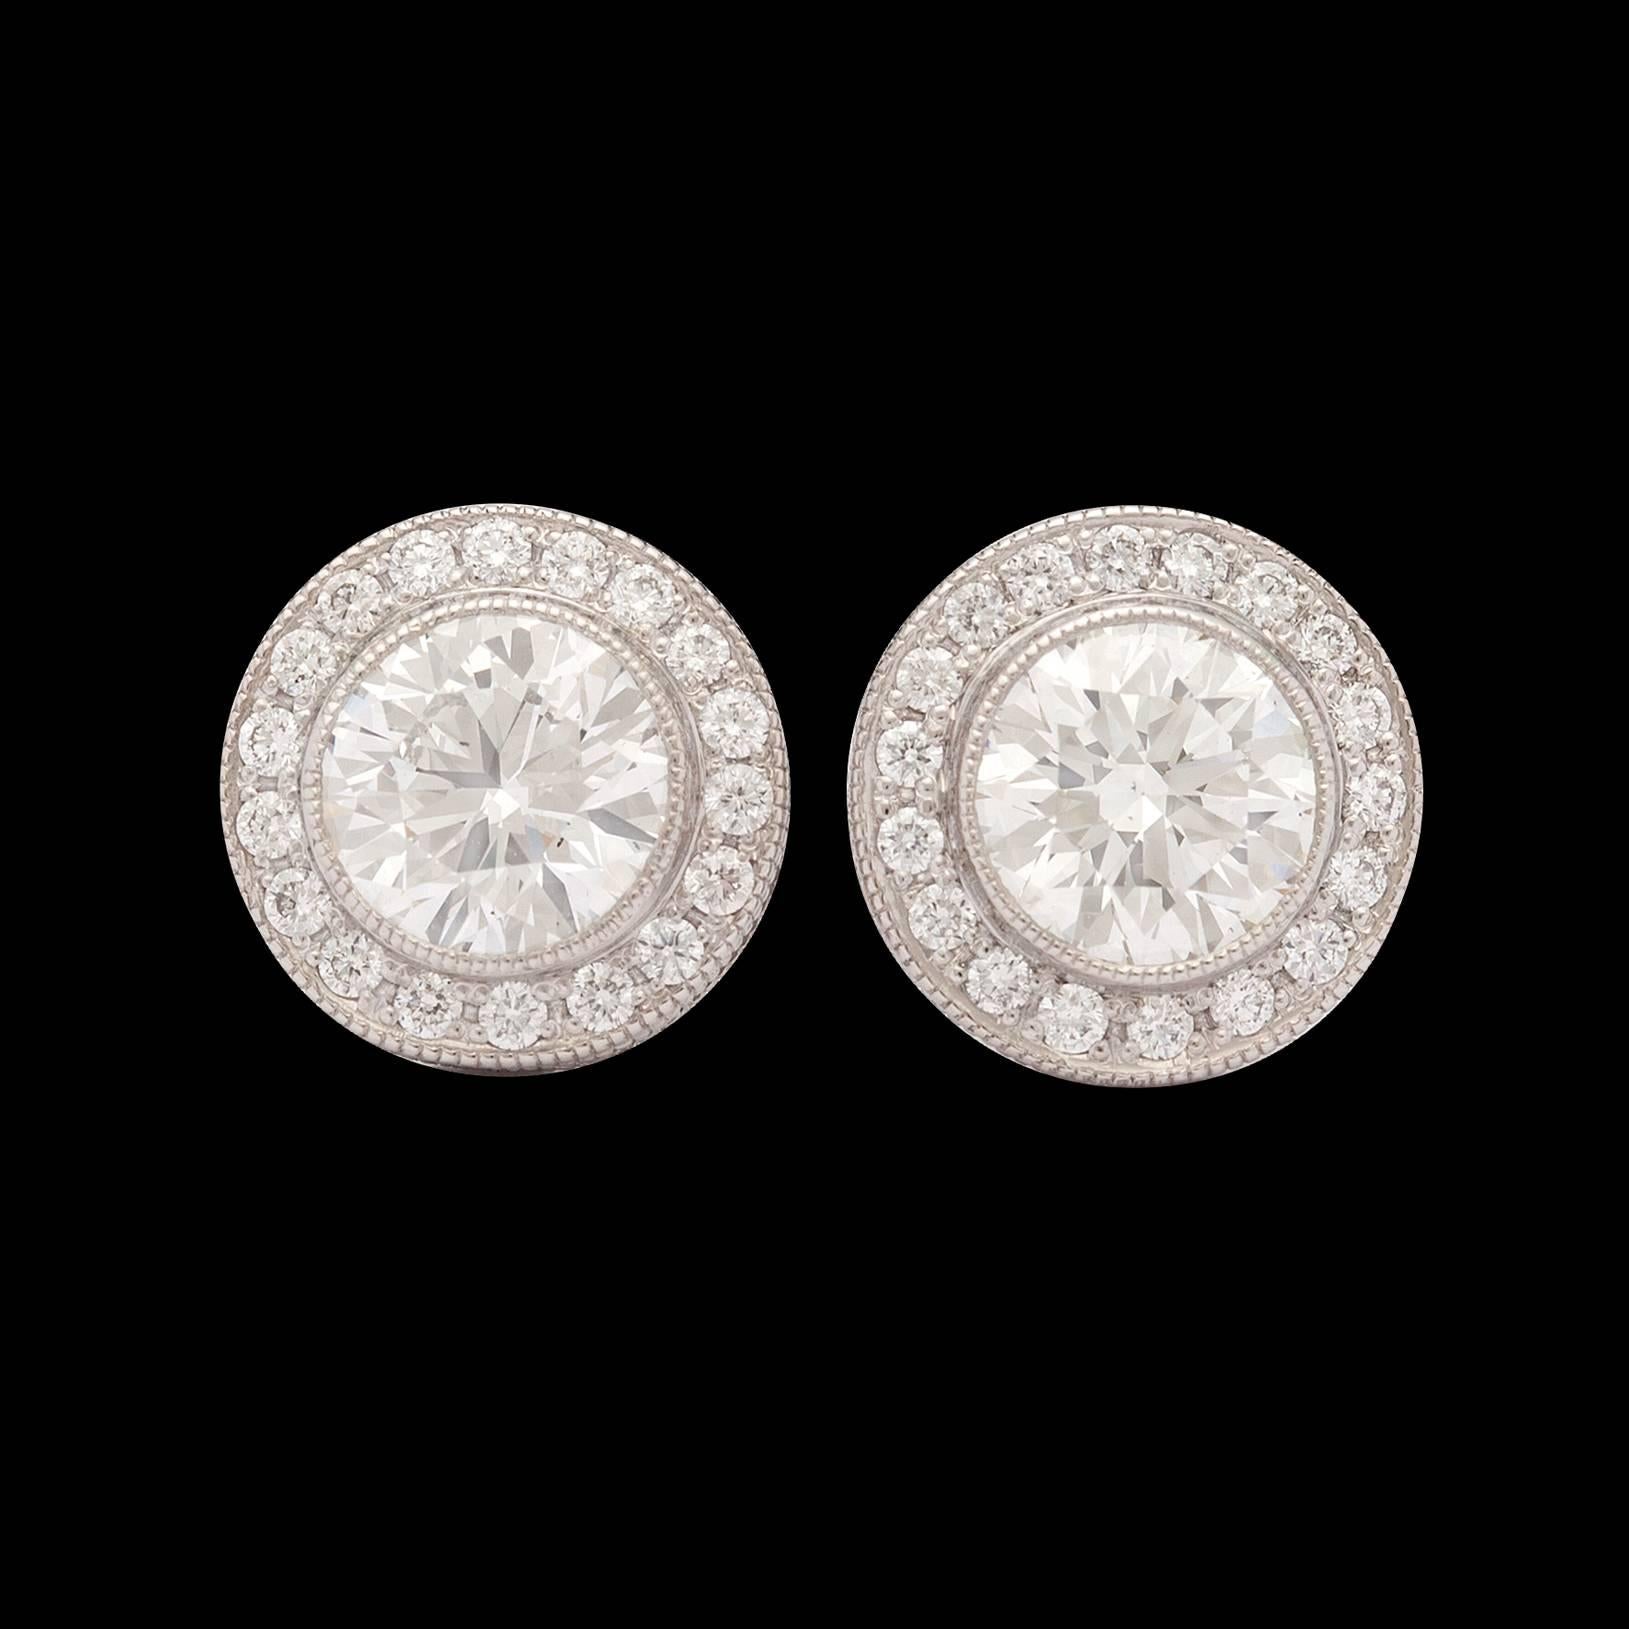 Platinum earrings feature two round brilliant cut diamonds weighing 1.60cttw bezel set in halos.  The additional 36 diamonds total approximately 0.23ct. These push back studs each have a diameter of 9.5mm and they total 4.0 grams.  This is a